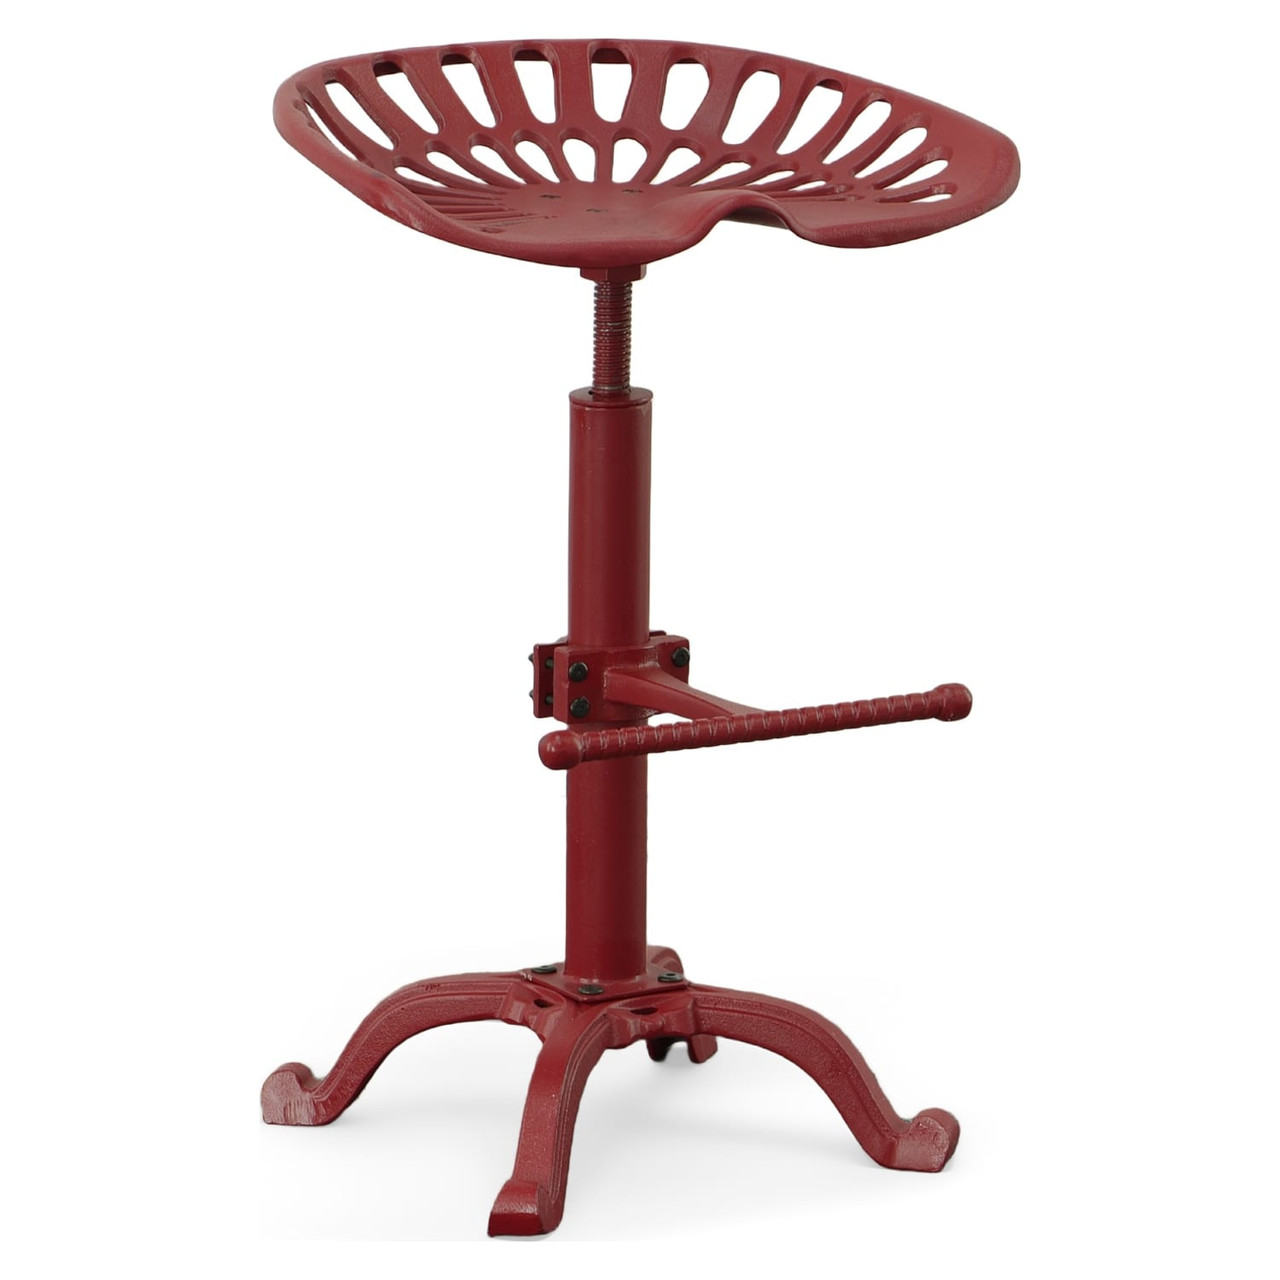 Adjustable Tractor Seat Stool, Red